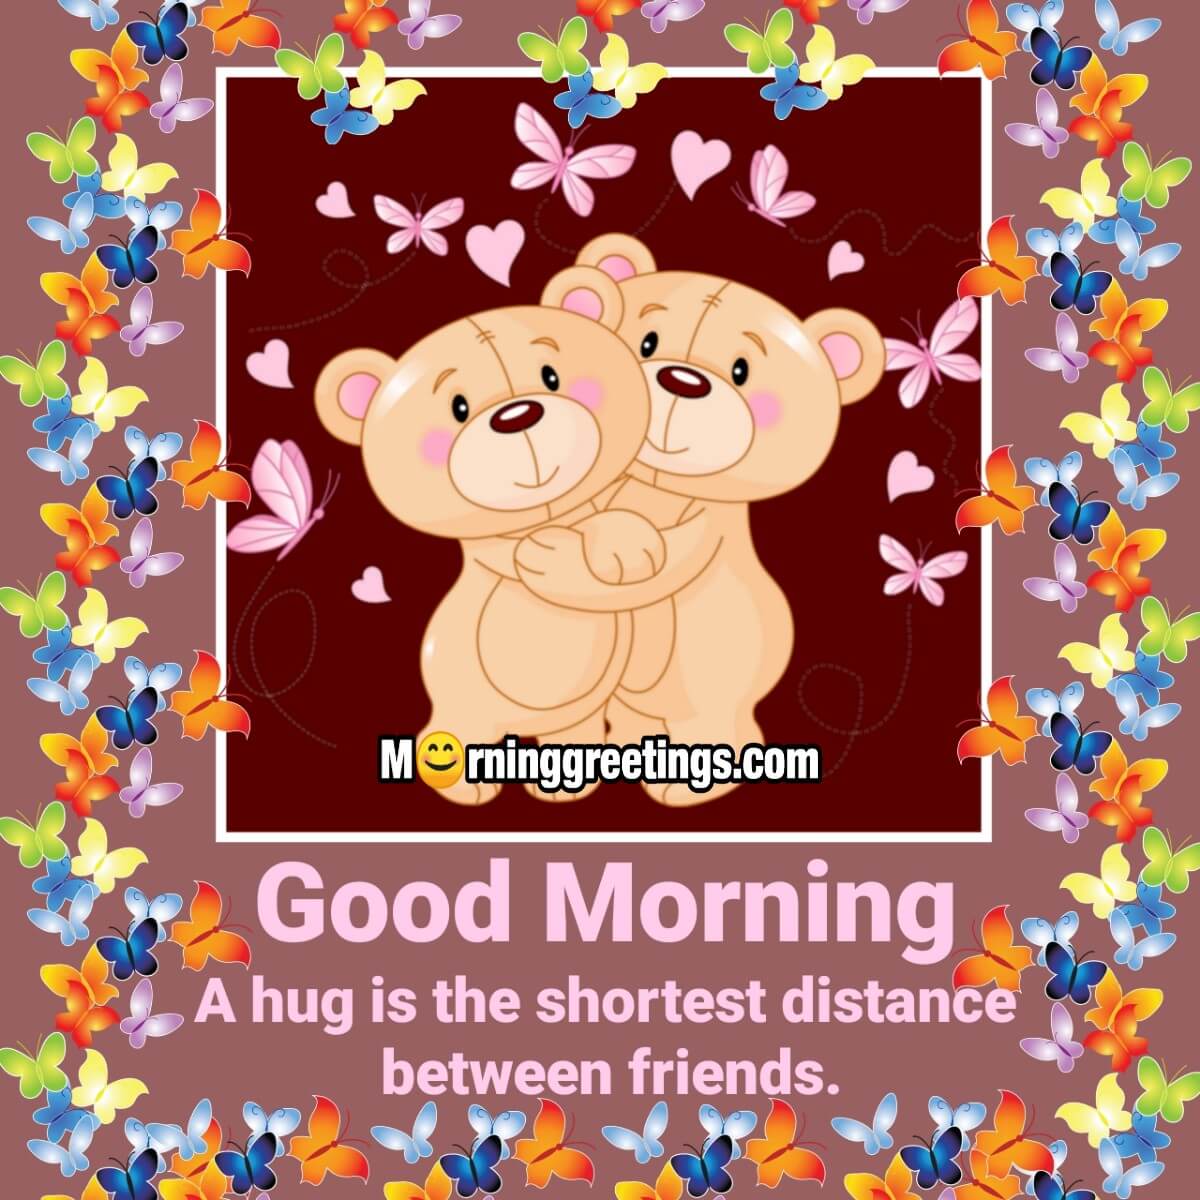 Good Morning Hug Quote For Friends